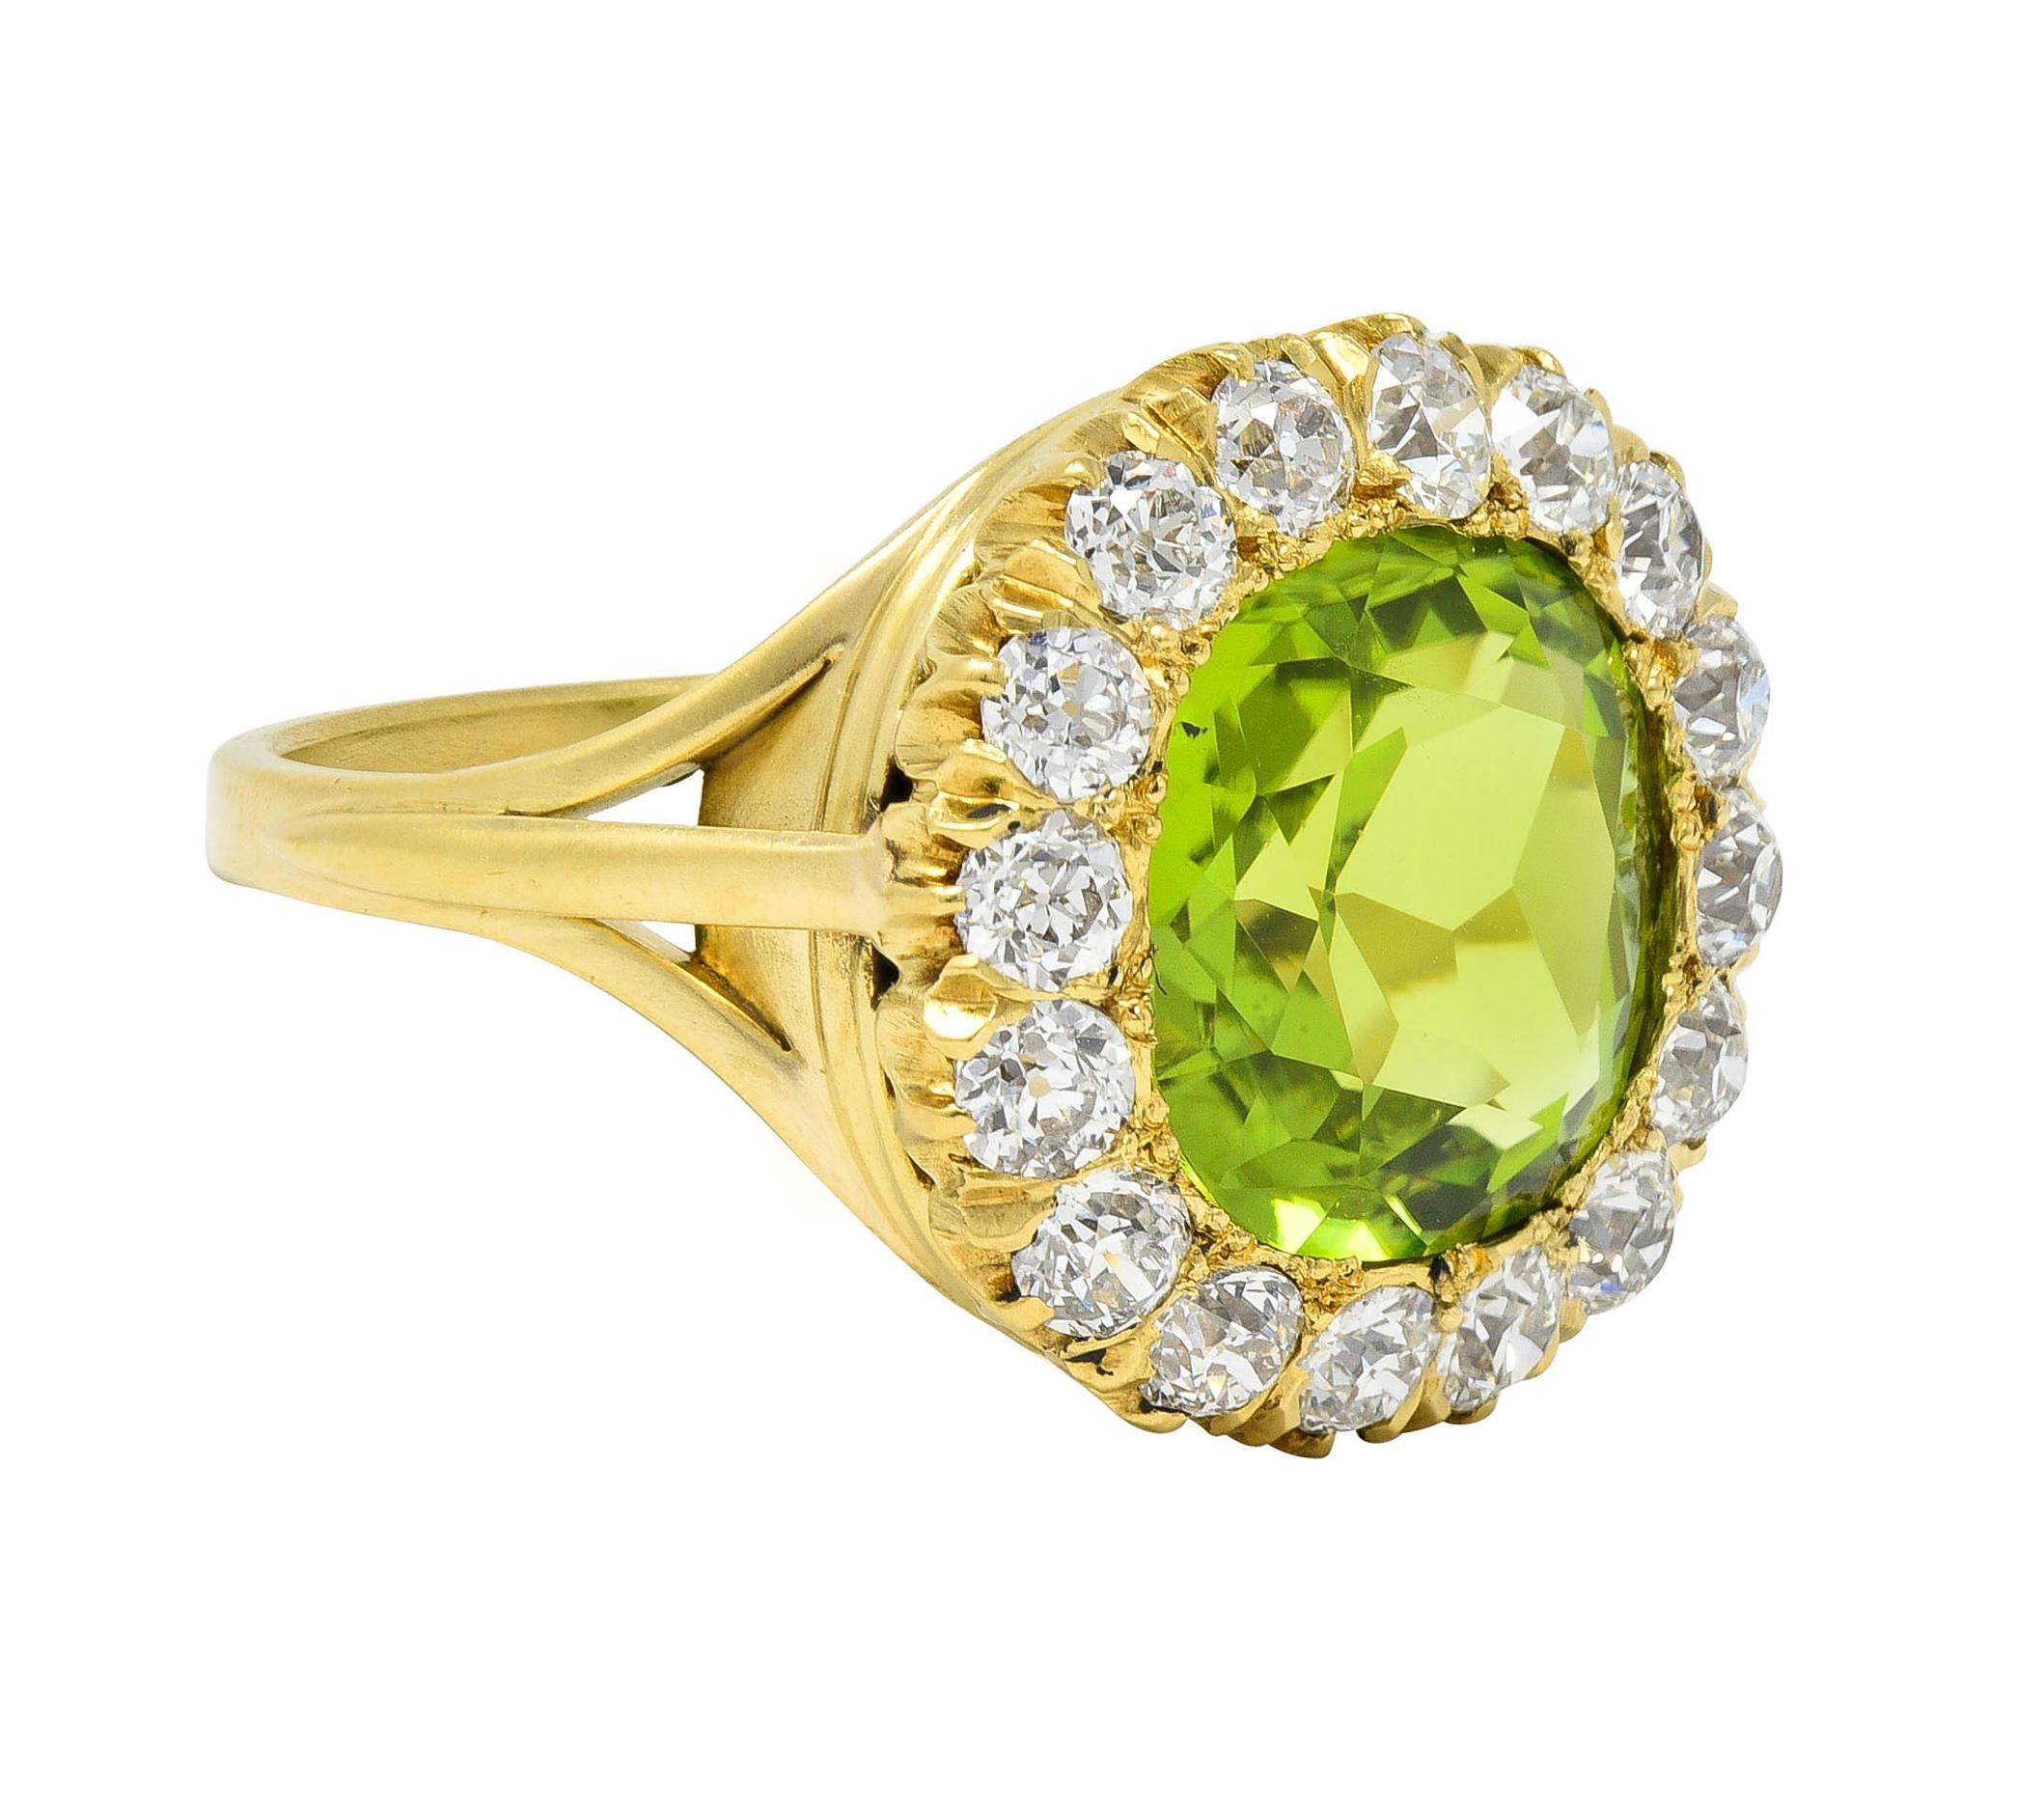 Centering a cushion-shaped mixed cut peridot weighing approximately 5.18 carats total 
Transparent vibrant yellowish green in color and bead set with halo surround
Comprised of prong set old European cut diamonds 
Weighing approximately 1.60 carats